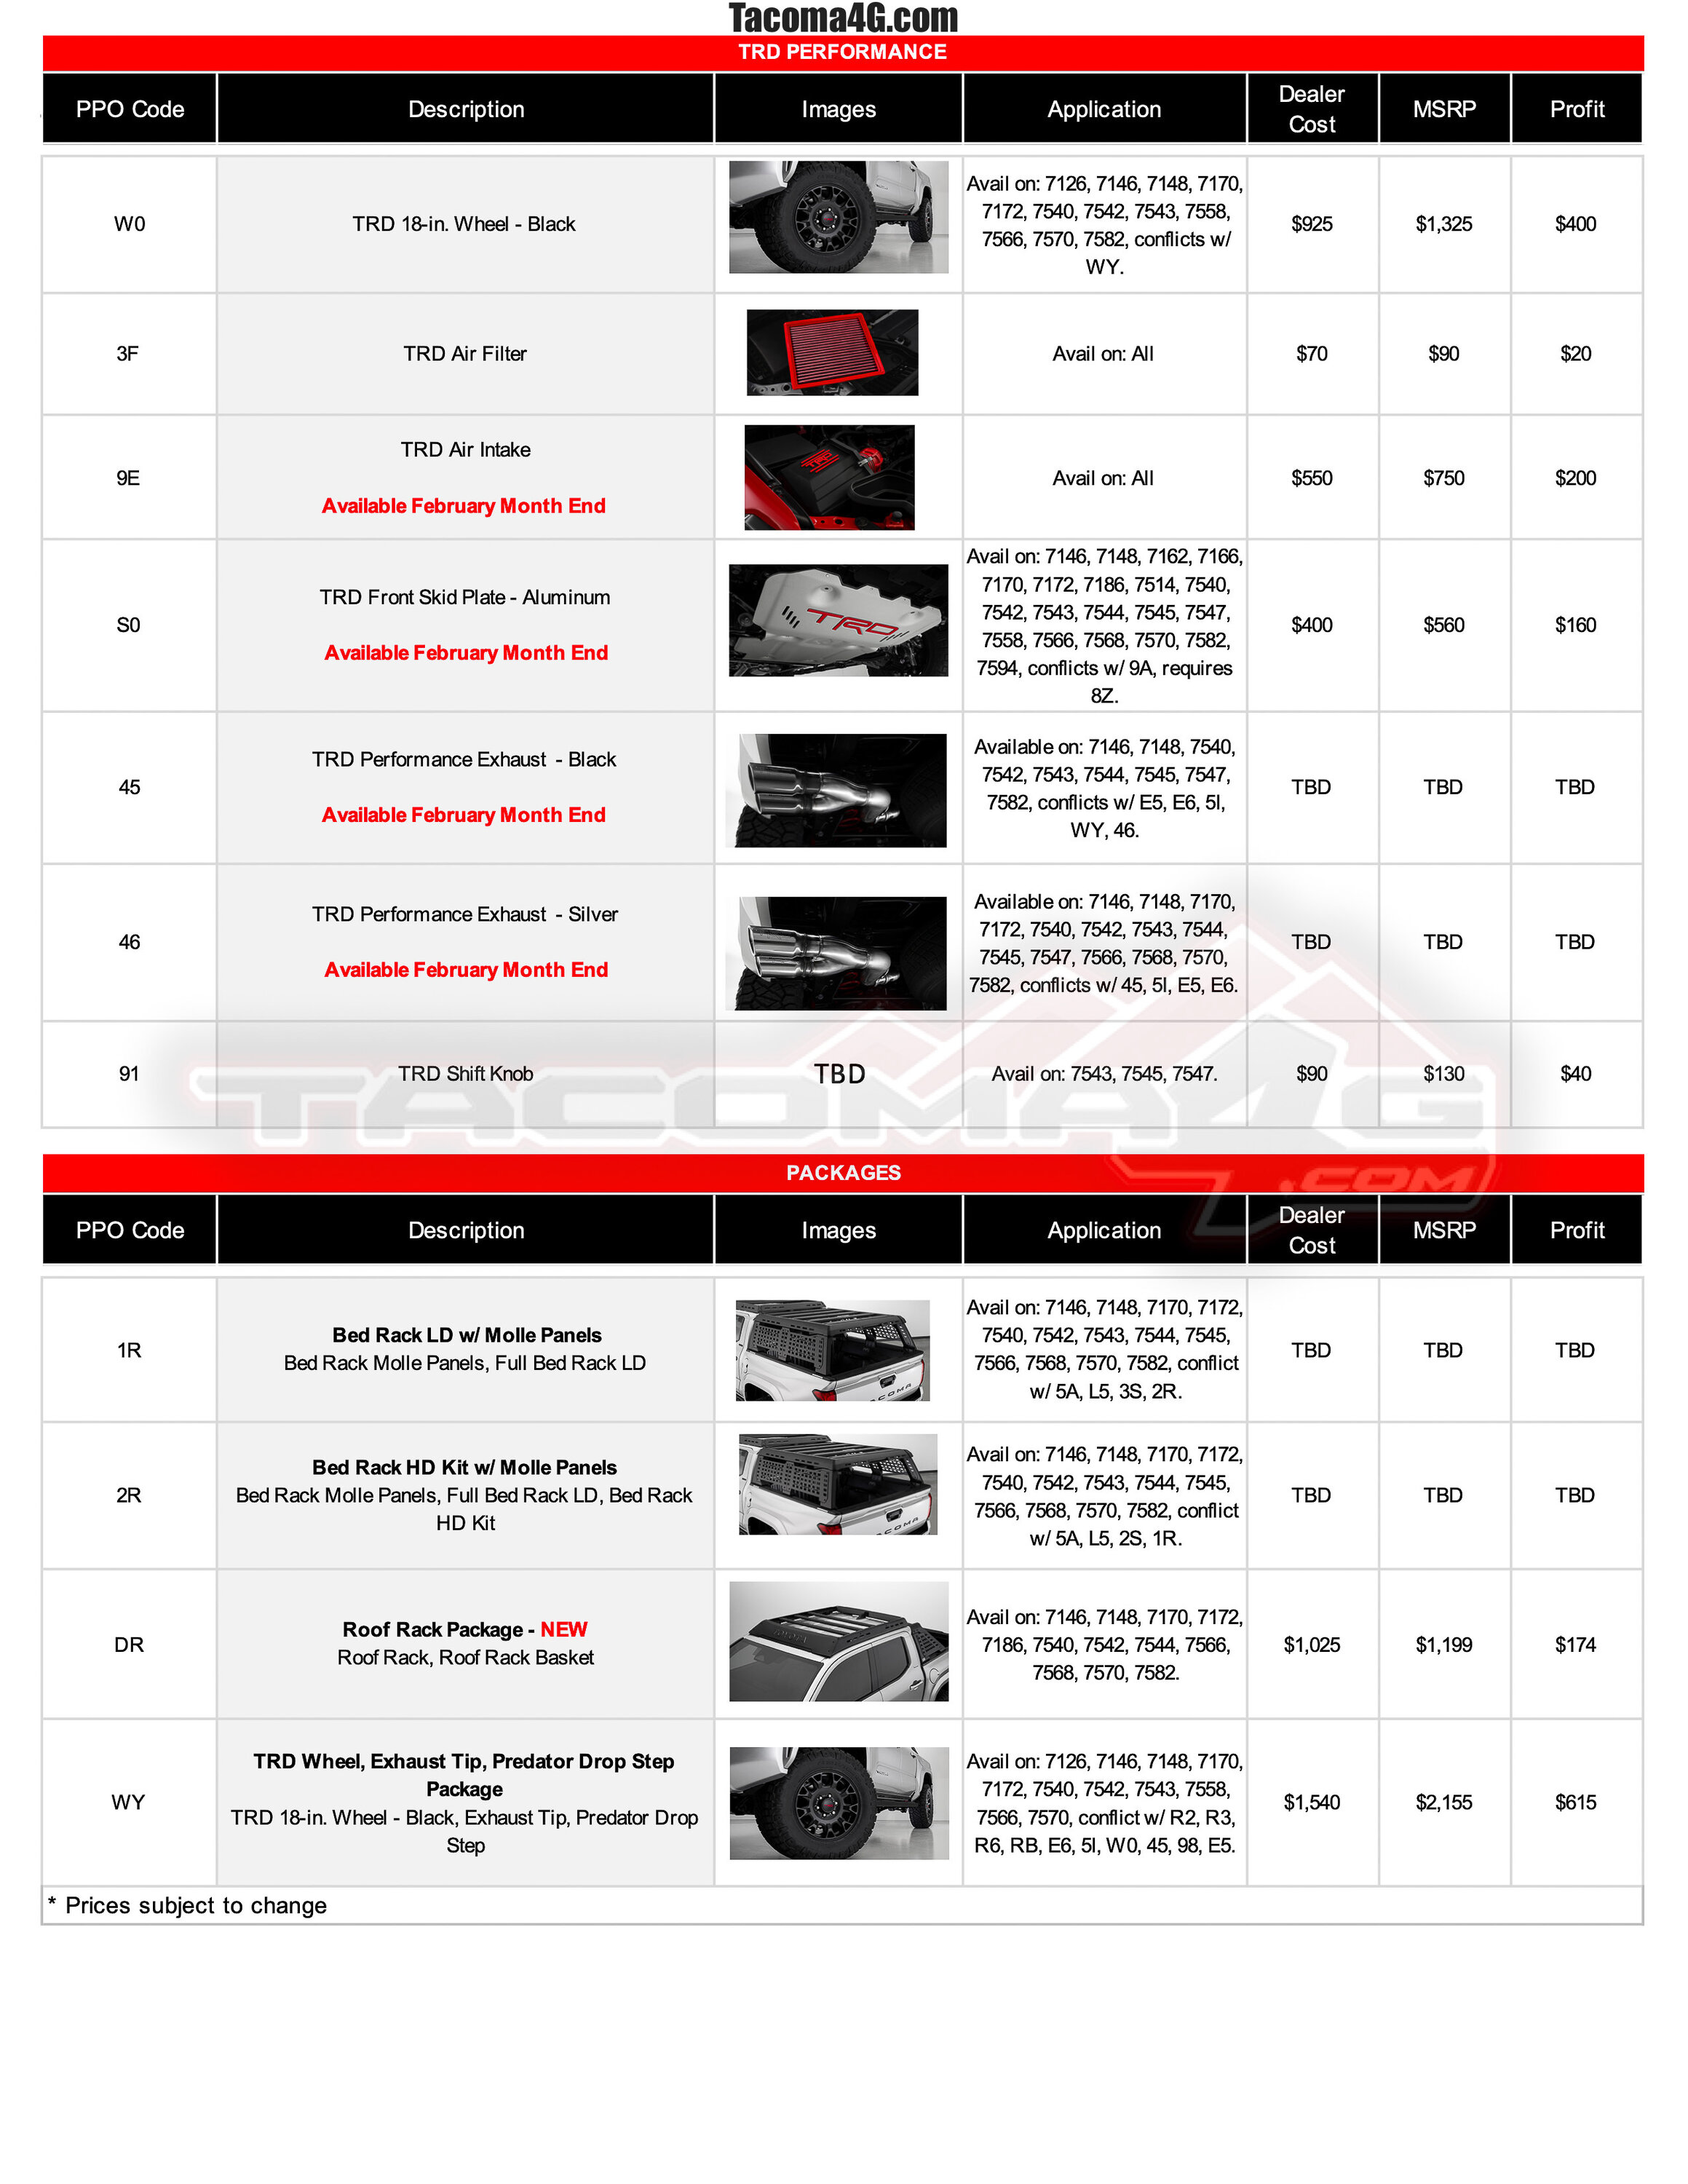 2024 Tacoma 2024 Tacoma Post-Production Options (PPO) Guide - OEM / TRD Accessories Parts + Pricing!  [UPDATED 5-7-24] 2024 Tacoma PPO Accessories Guide_02.09.24-6